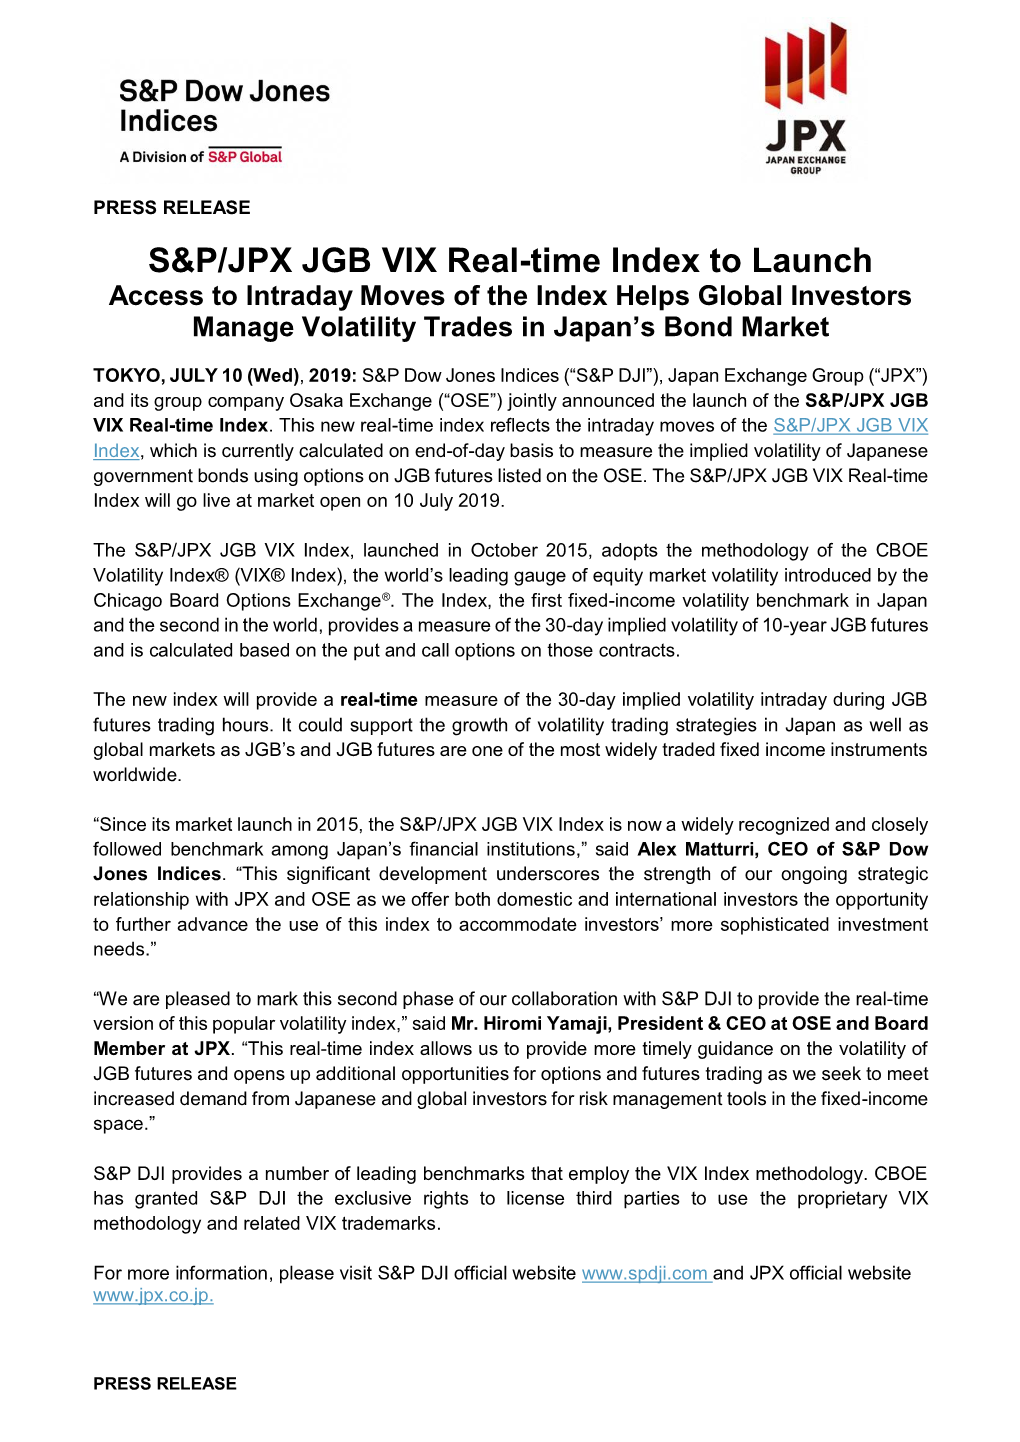 S&P/JPX JGB VIX Real-Time Index to Launch